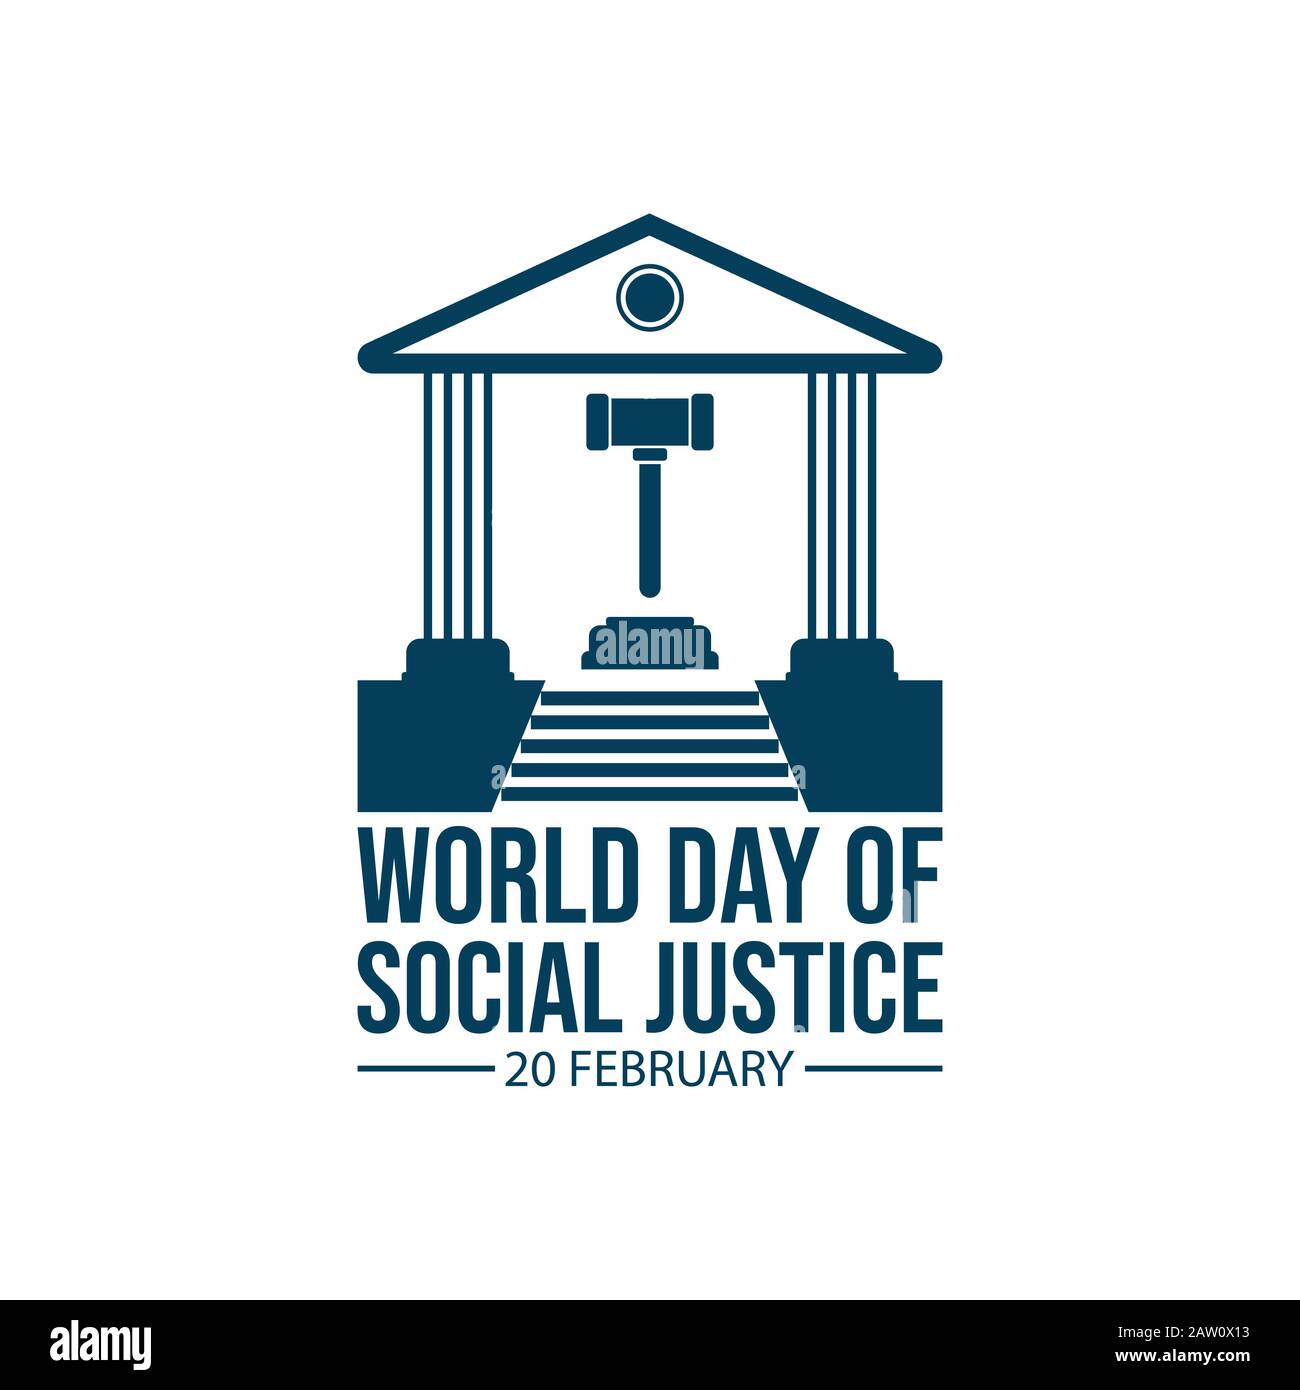 World day social justice on february 20 vector image. World justice day celebration with Courthouse and hammer image vector Stock Vector